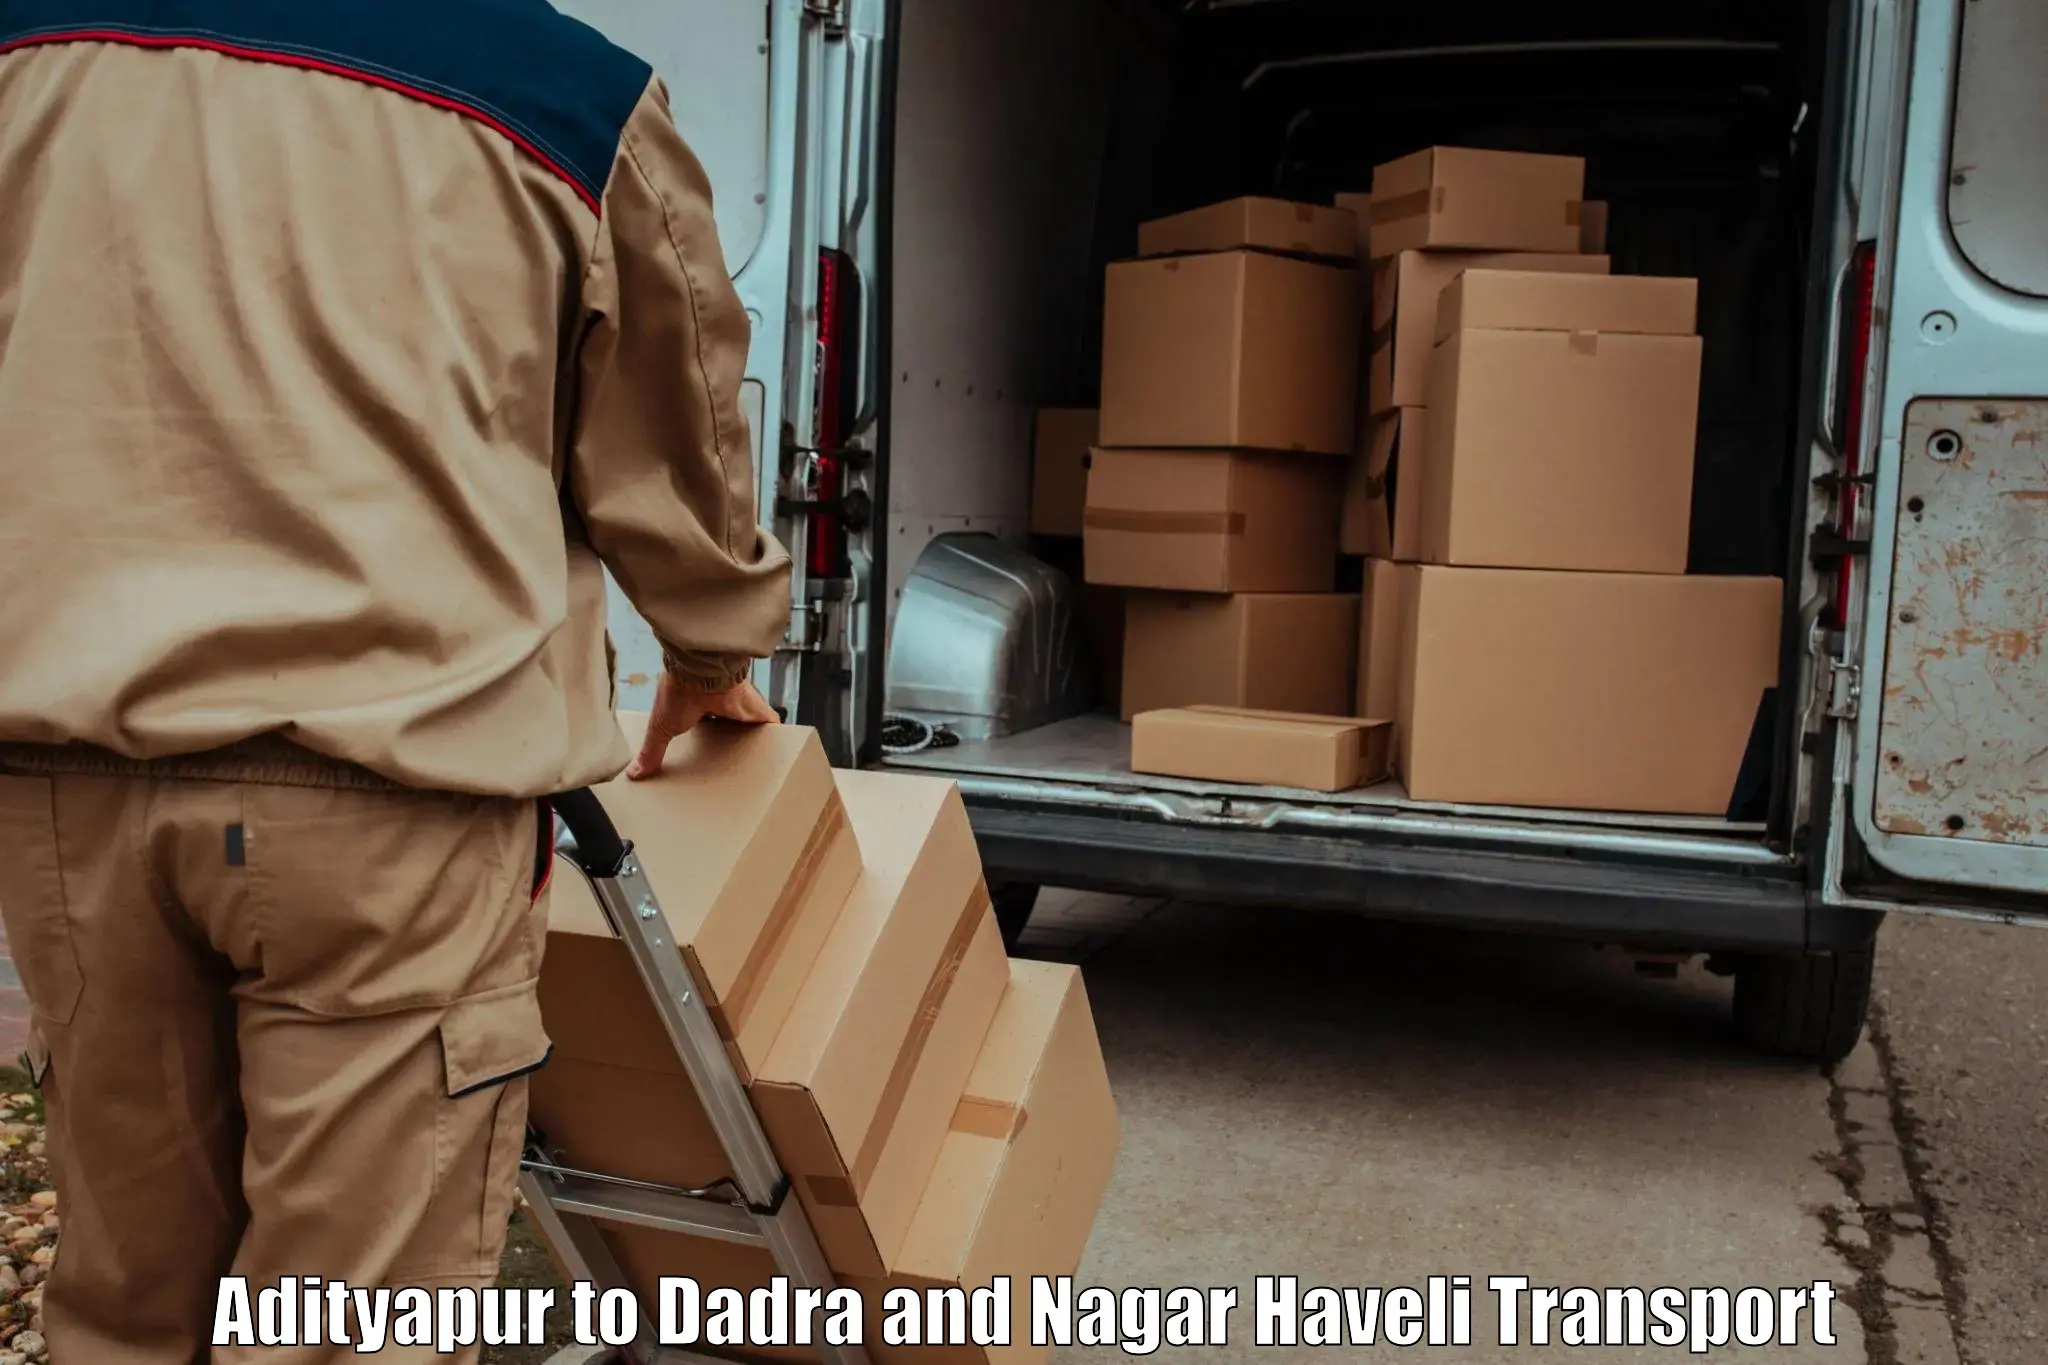 Express transport services in Adityapur to Dadra and Nagar Haveli